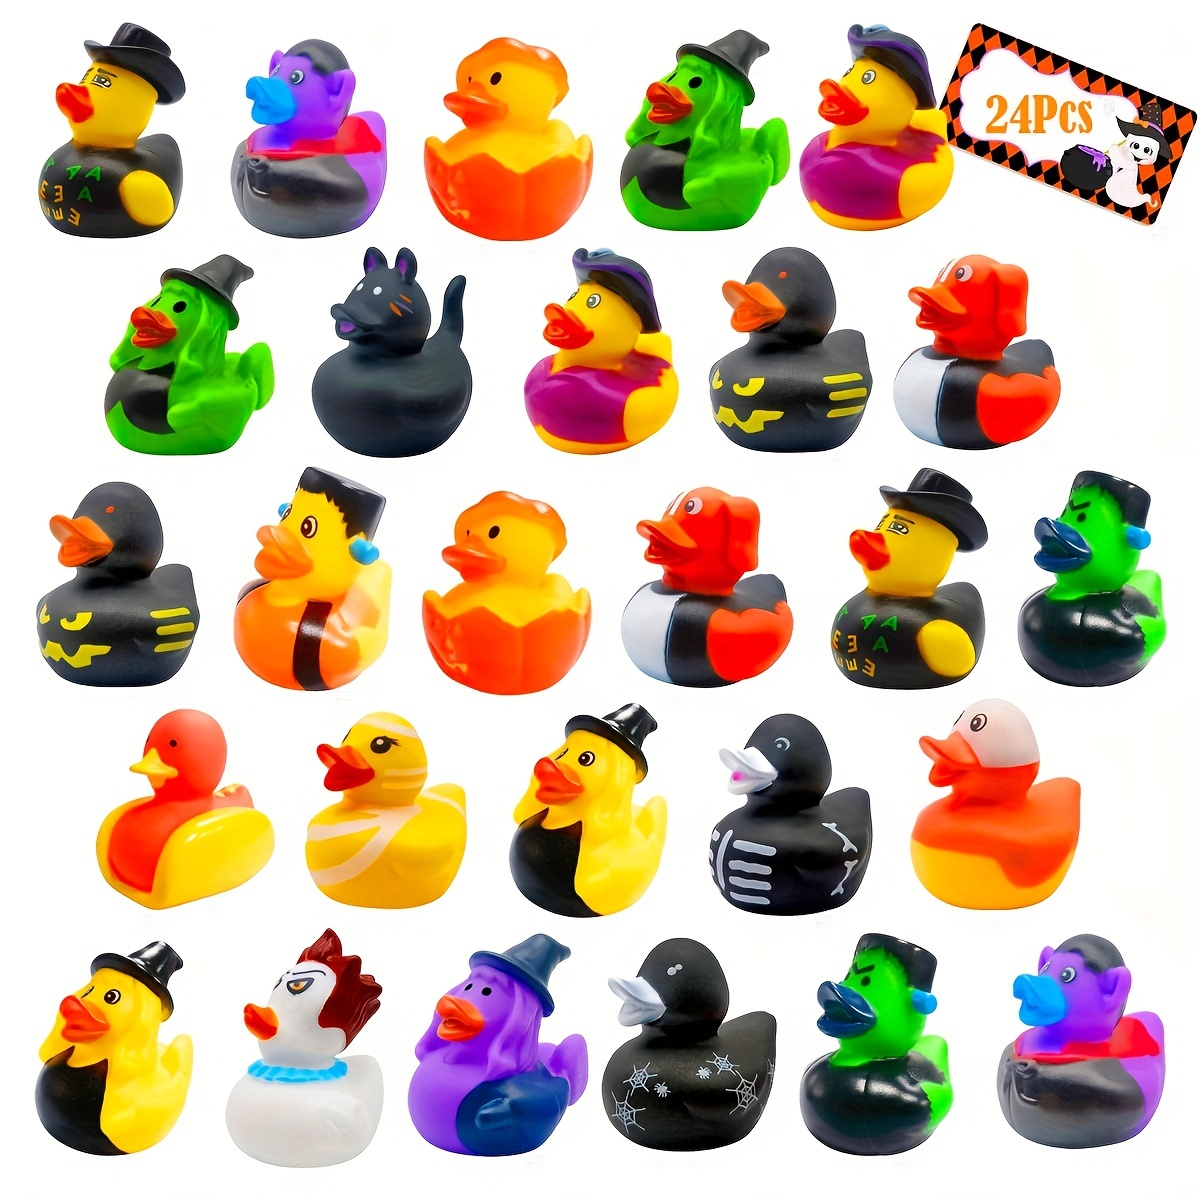 Hide-A-Duck (100pc)  Tiny Resin Ducks To Prank Your Friends With